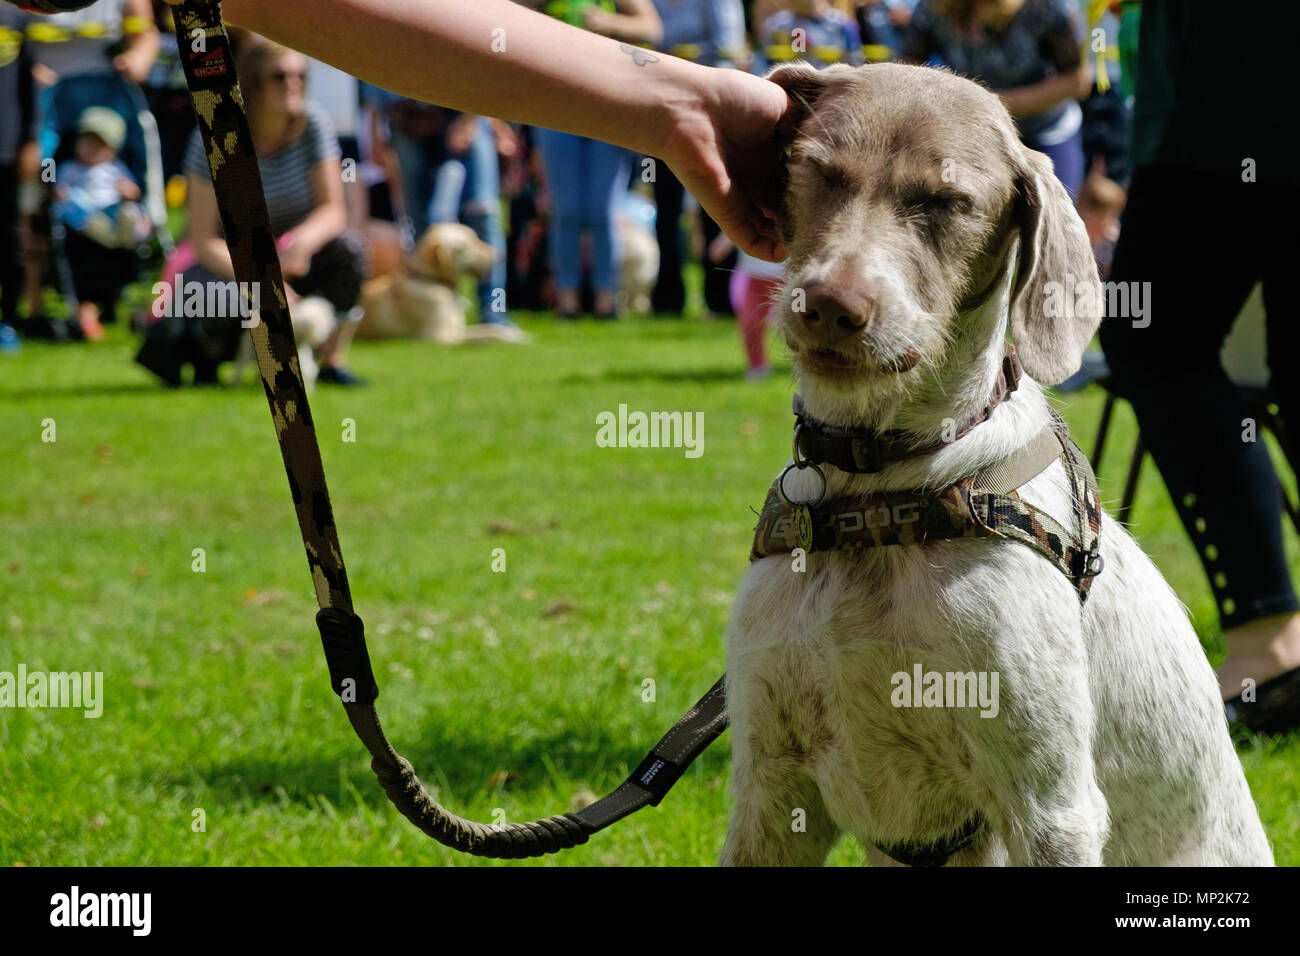 White & Brown dog closes eyes as he enjoys an ear scratch from owner at dog show in Canons Park, Edgware, North London, during annual Family Fun Day. Stock Photo